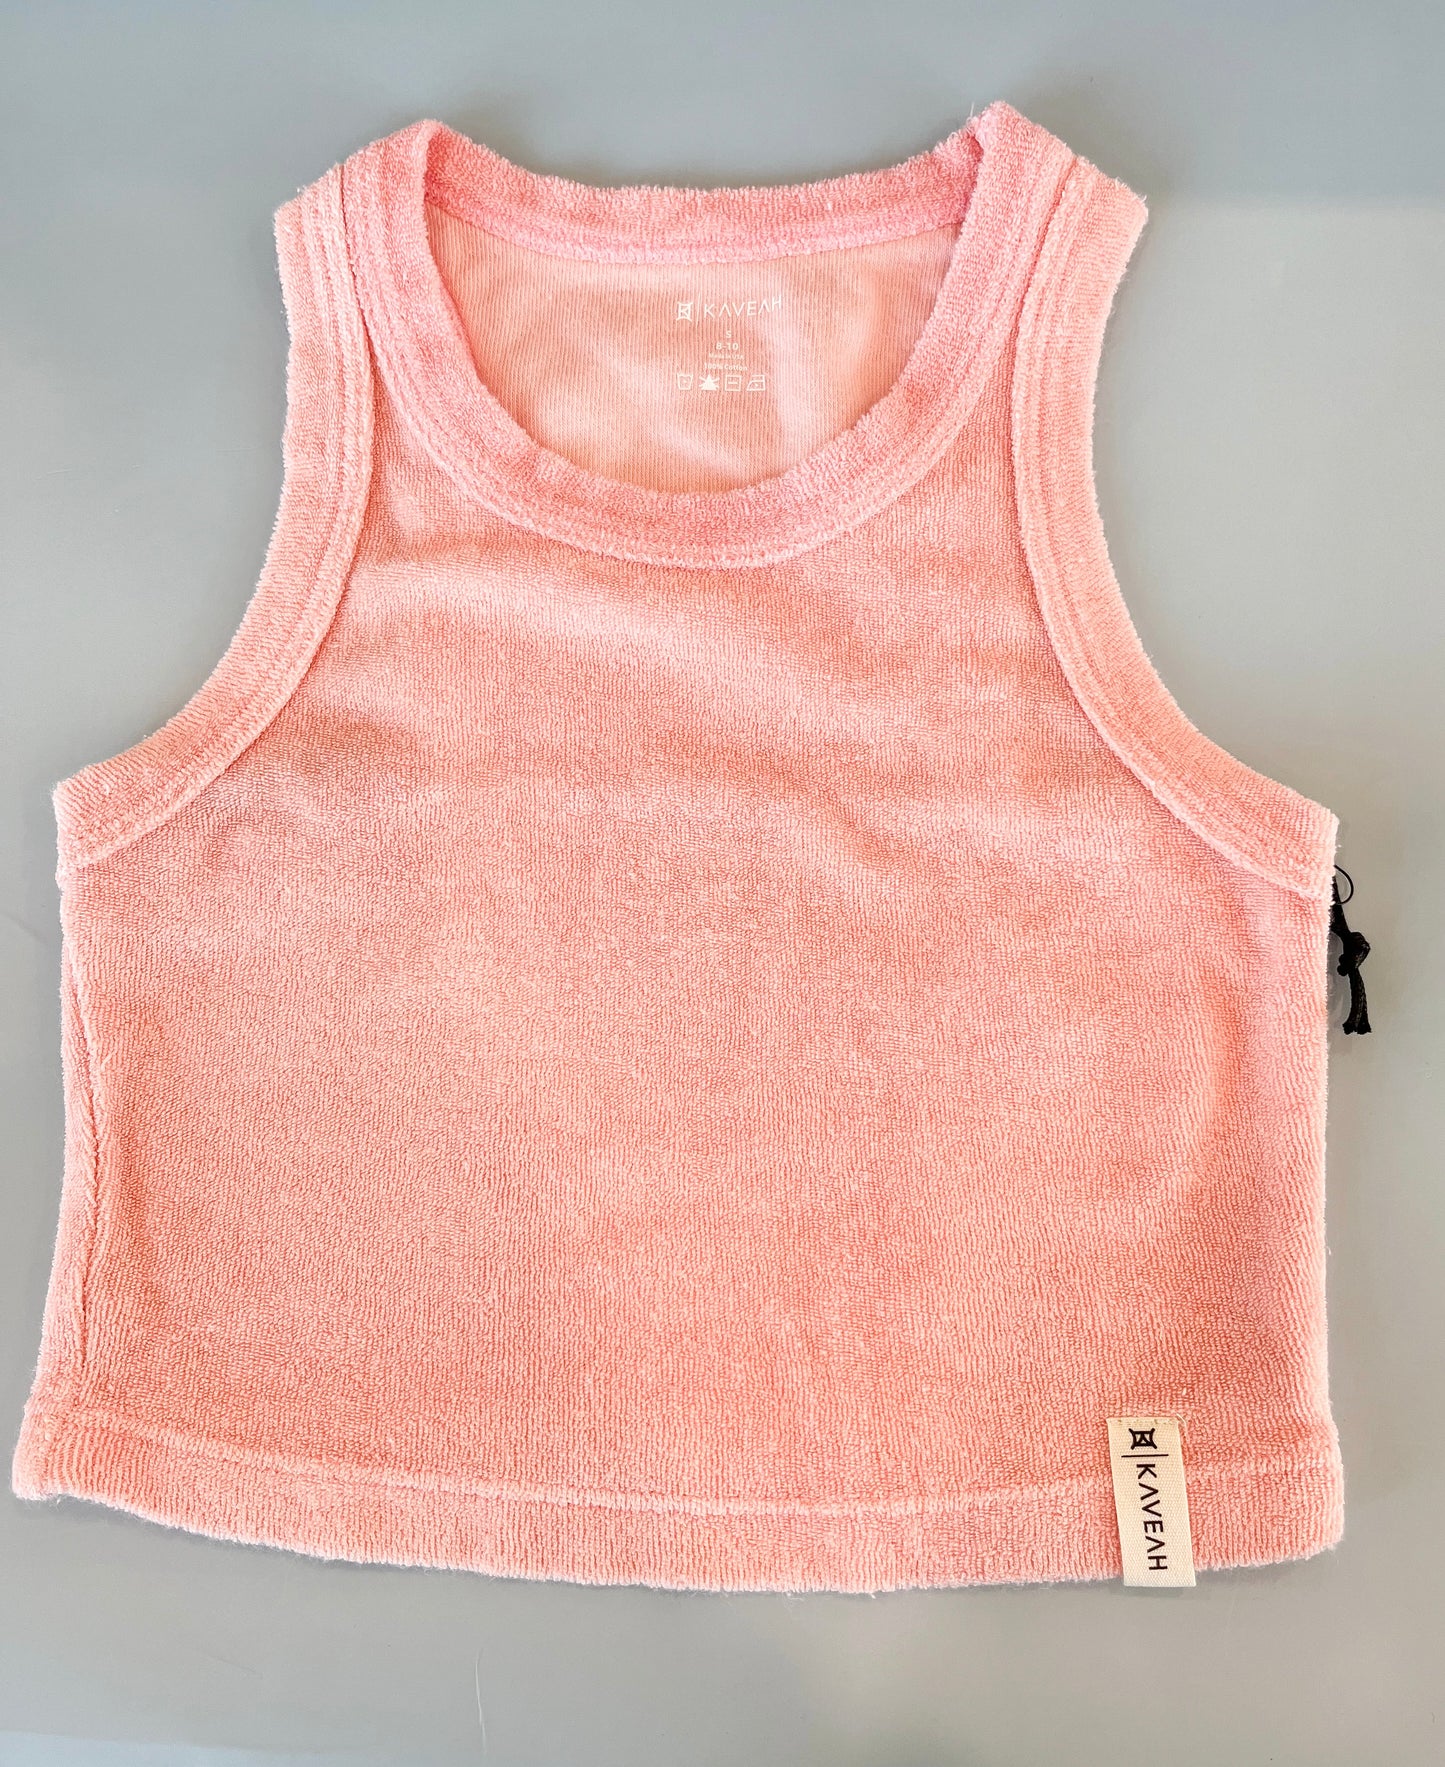 Terry Cloth Muscle Tank, Pink Icing - Magpies Paducah